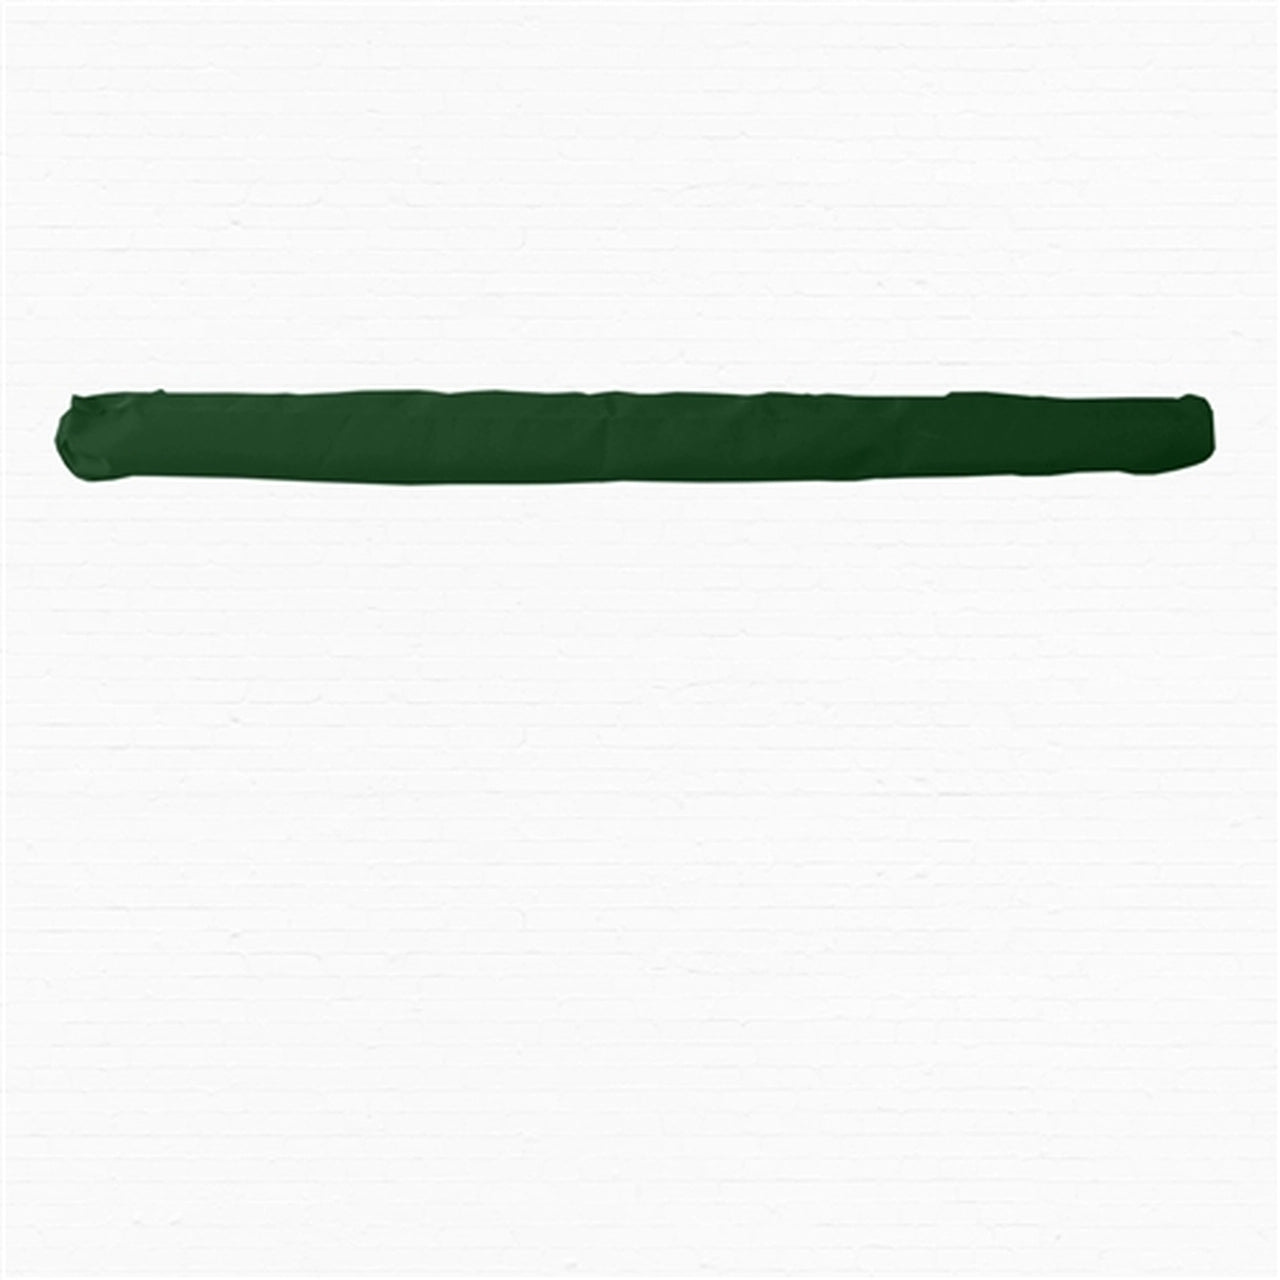 Aleko Protective Awning Cover - 10 x 8 Feet - Green